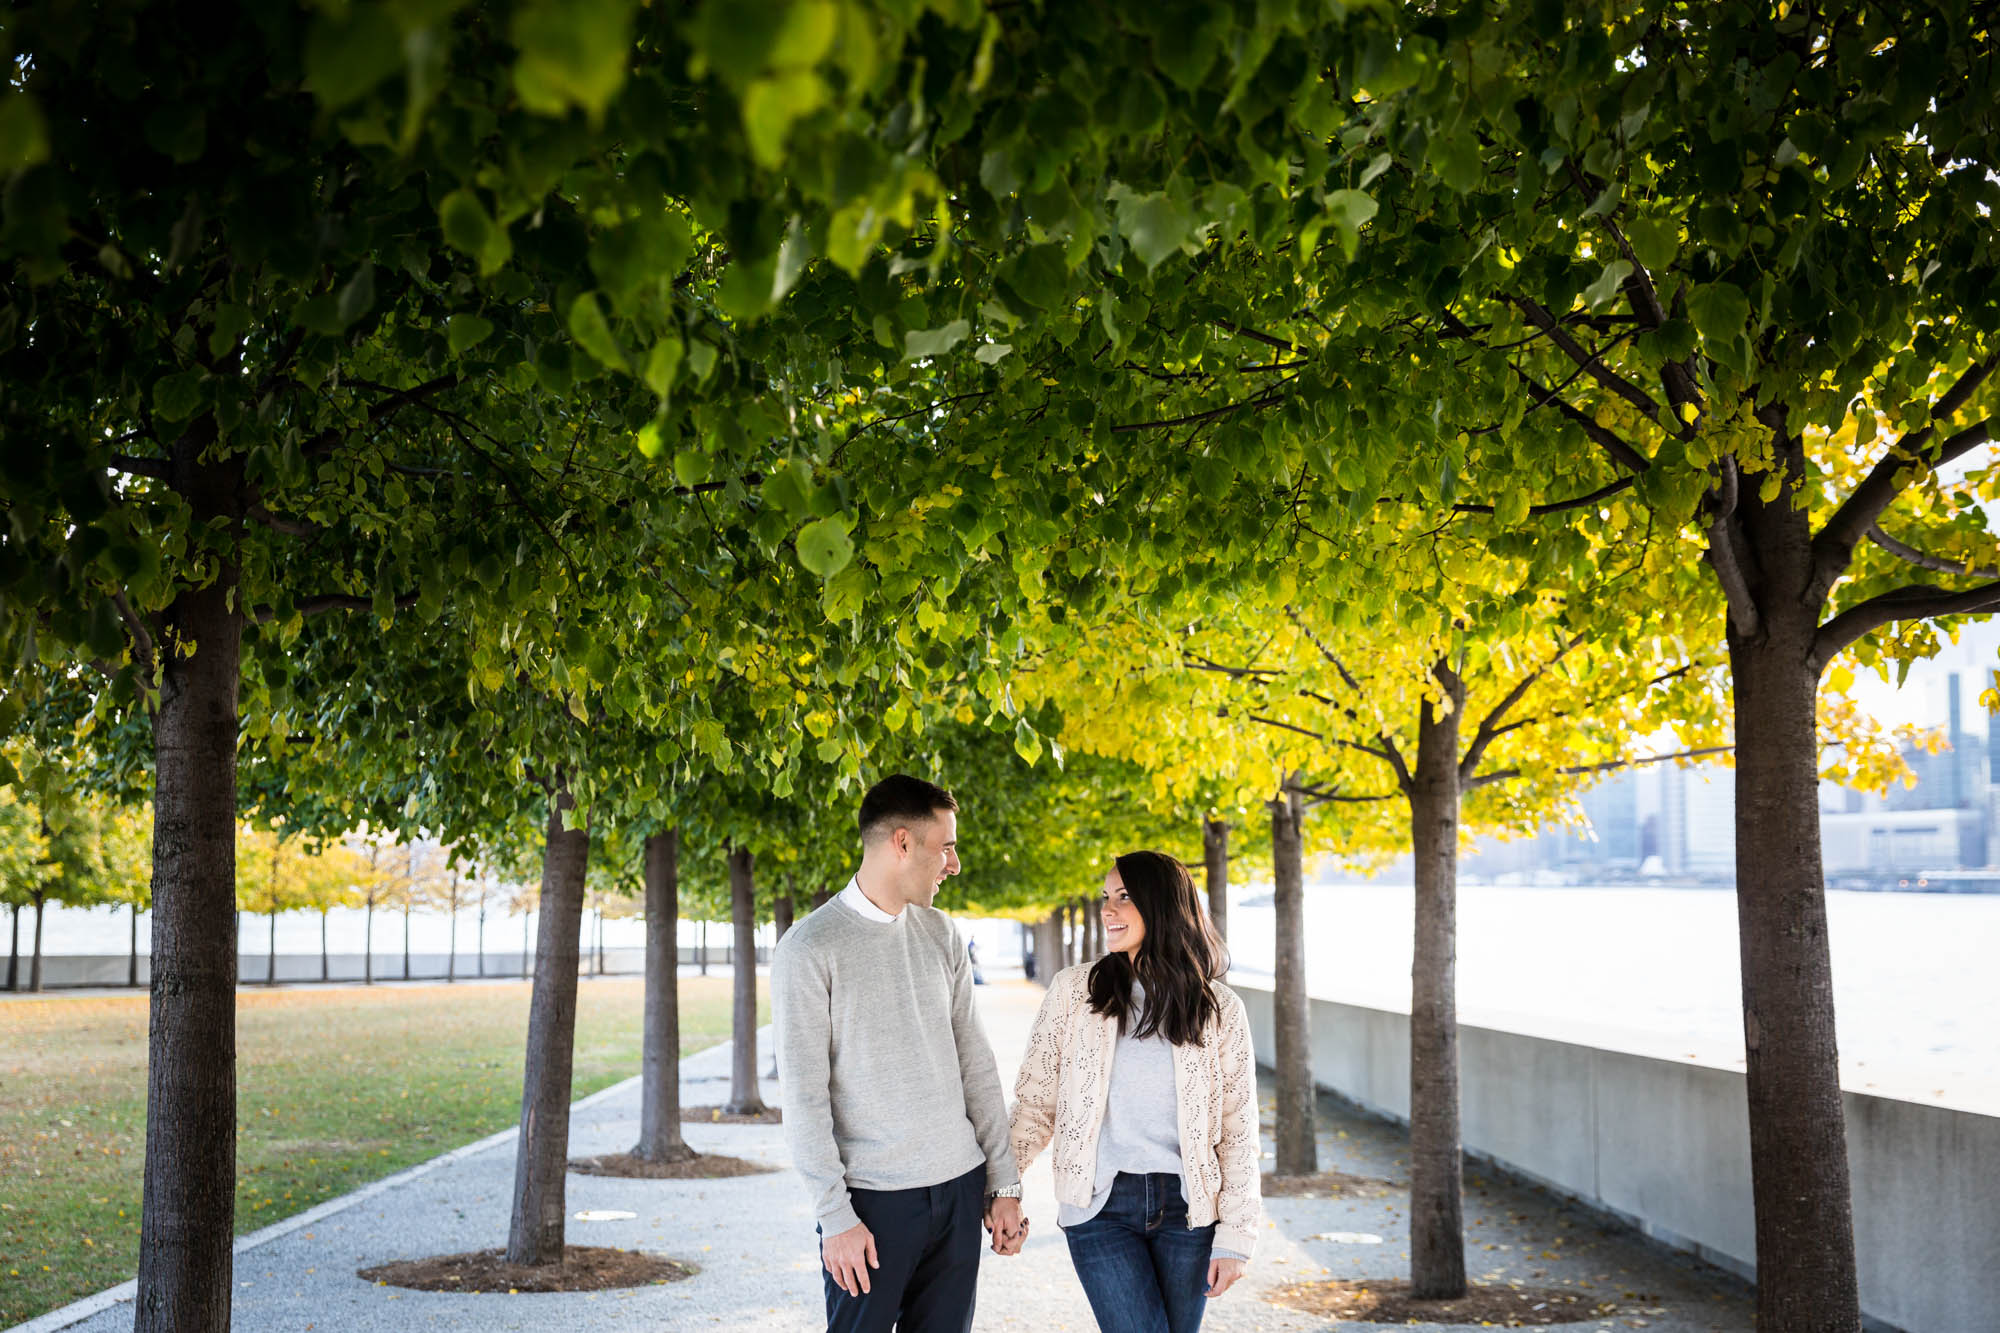 Couple looking at each other under trees during a Four Freedoms Park engagement photo shoot